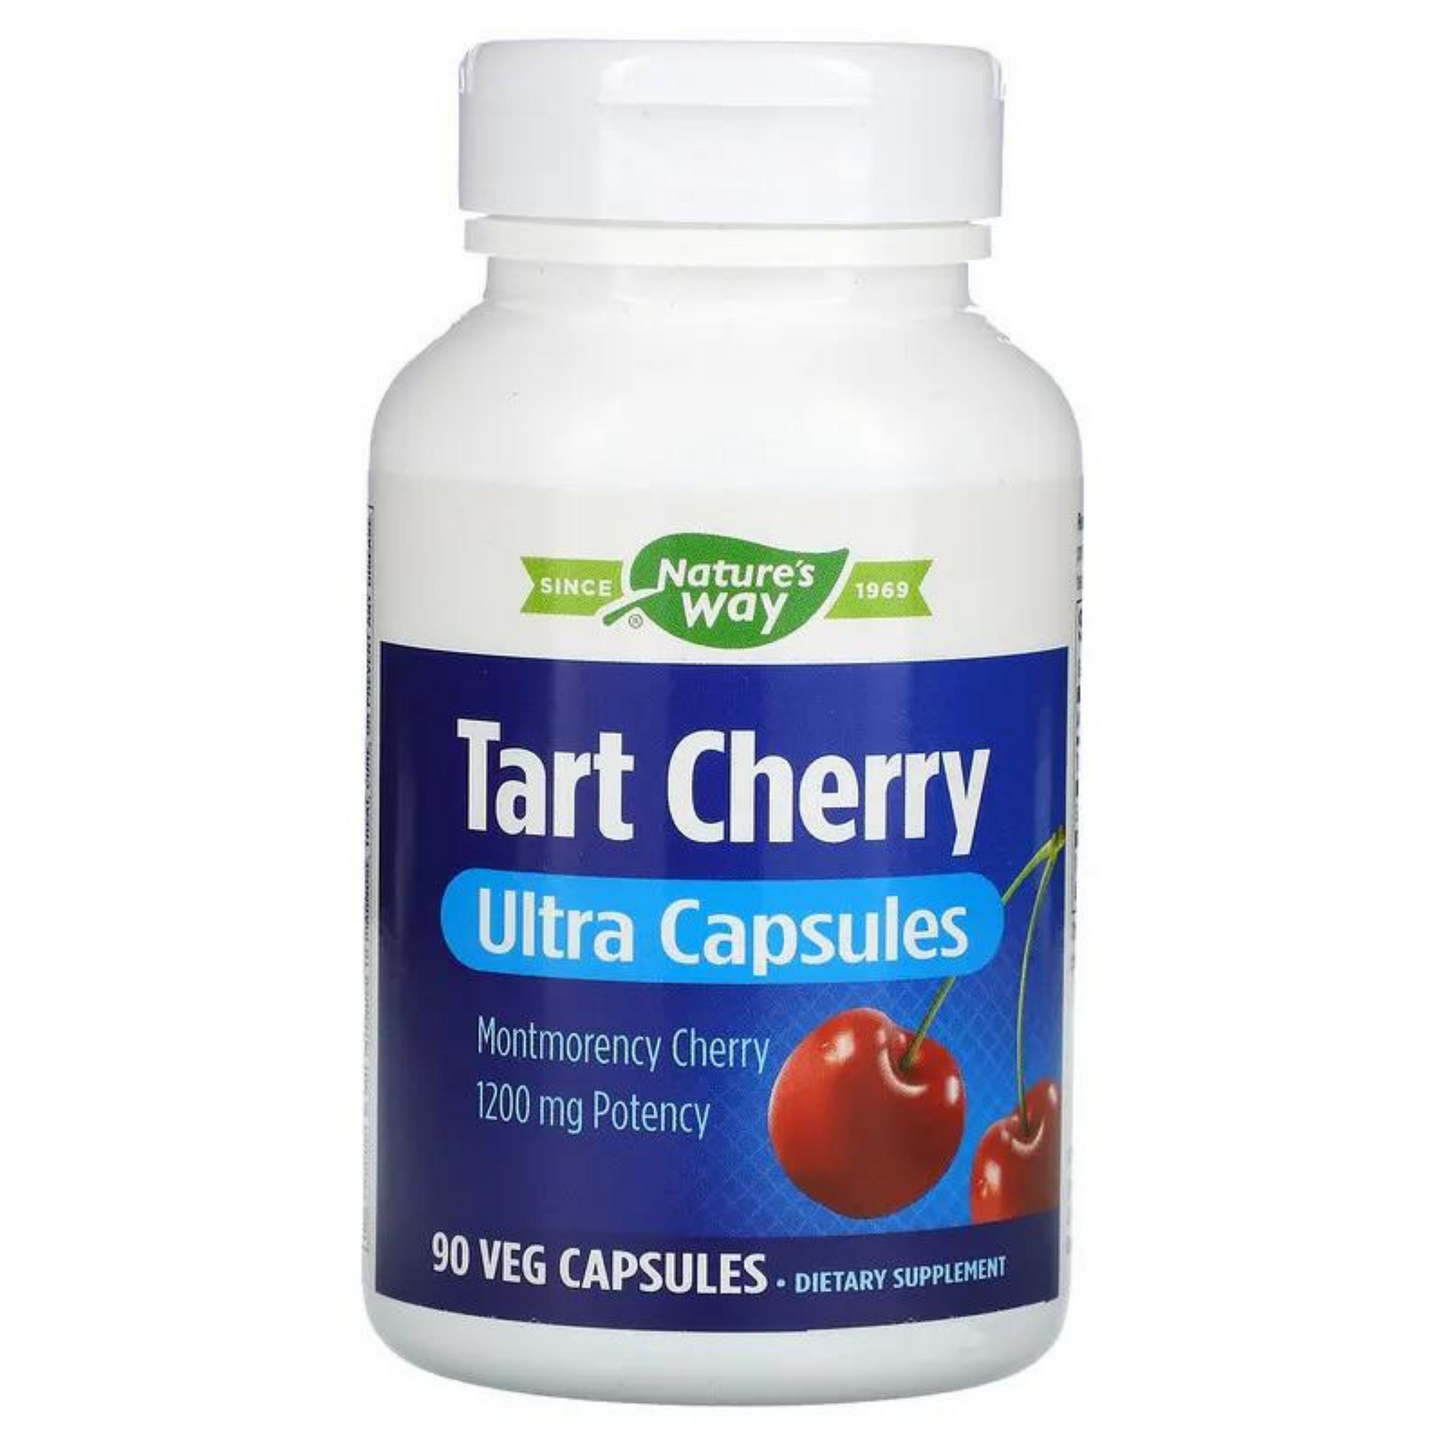 Primary image of Chewable Tart Cherry Ultra